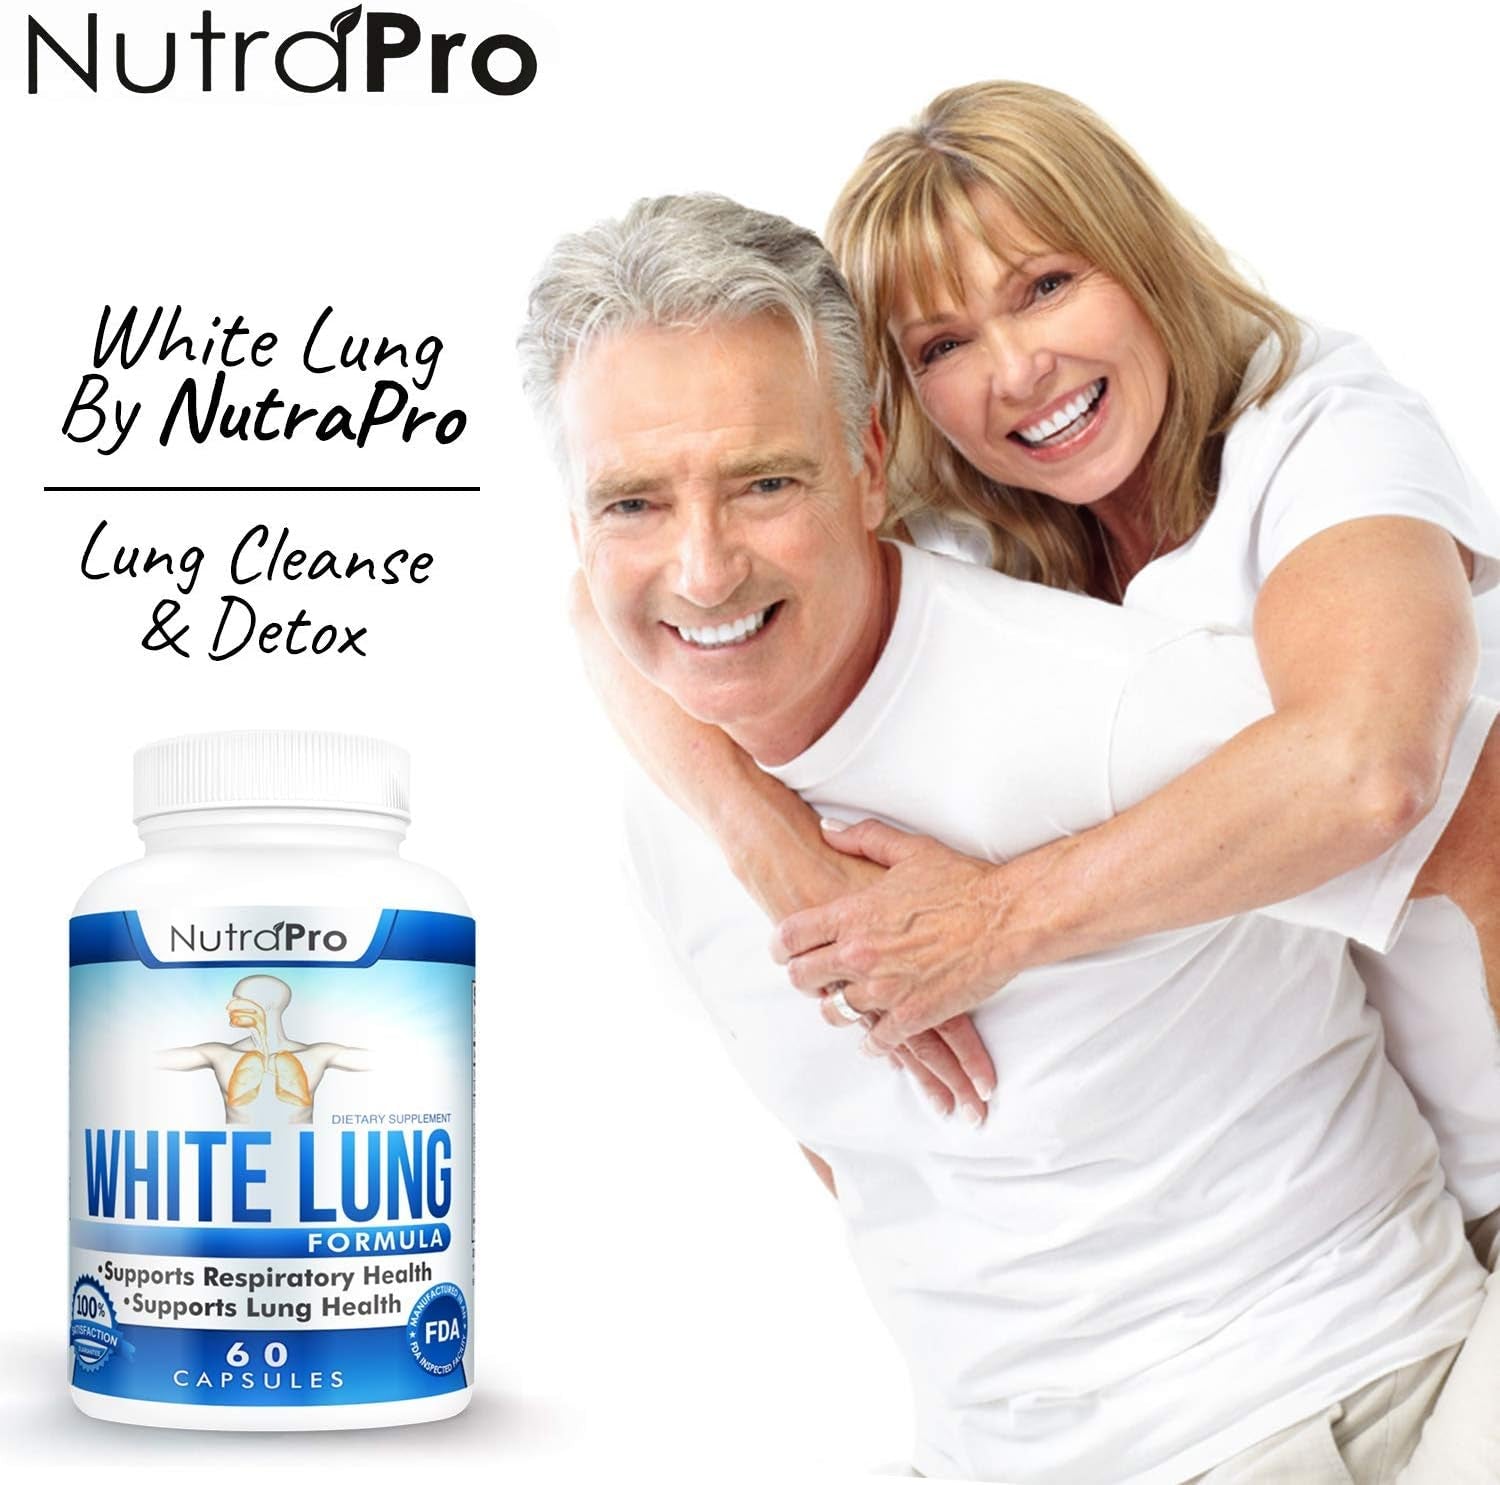 Nutrapro White Lung Lung Cleanse & Detox.Support Lung Health. Supports Respiratory Health. 60 Capsule - Made in GMP Certified Facility.